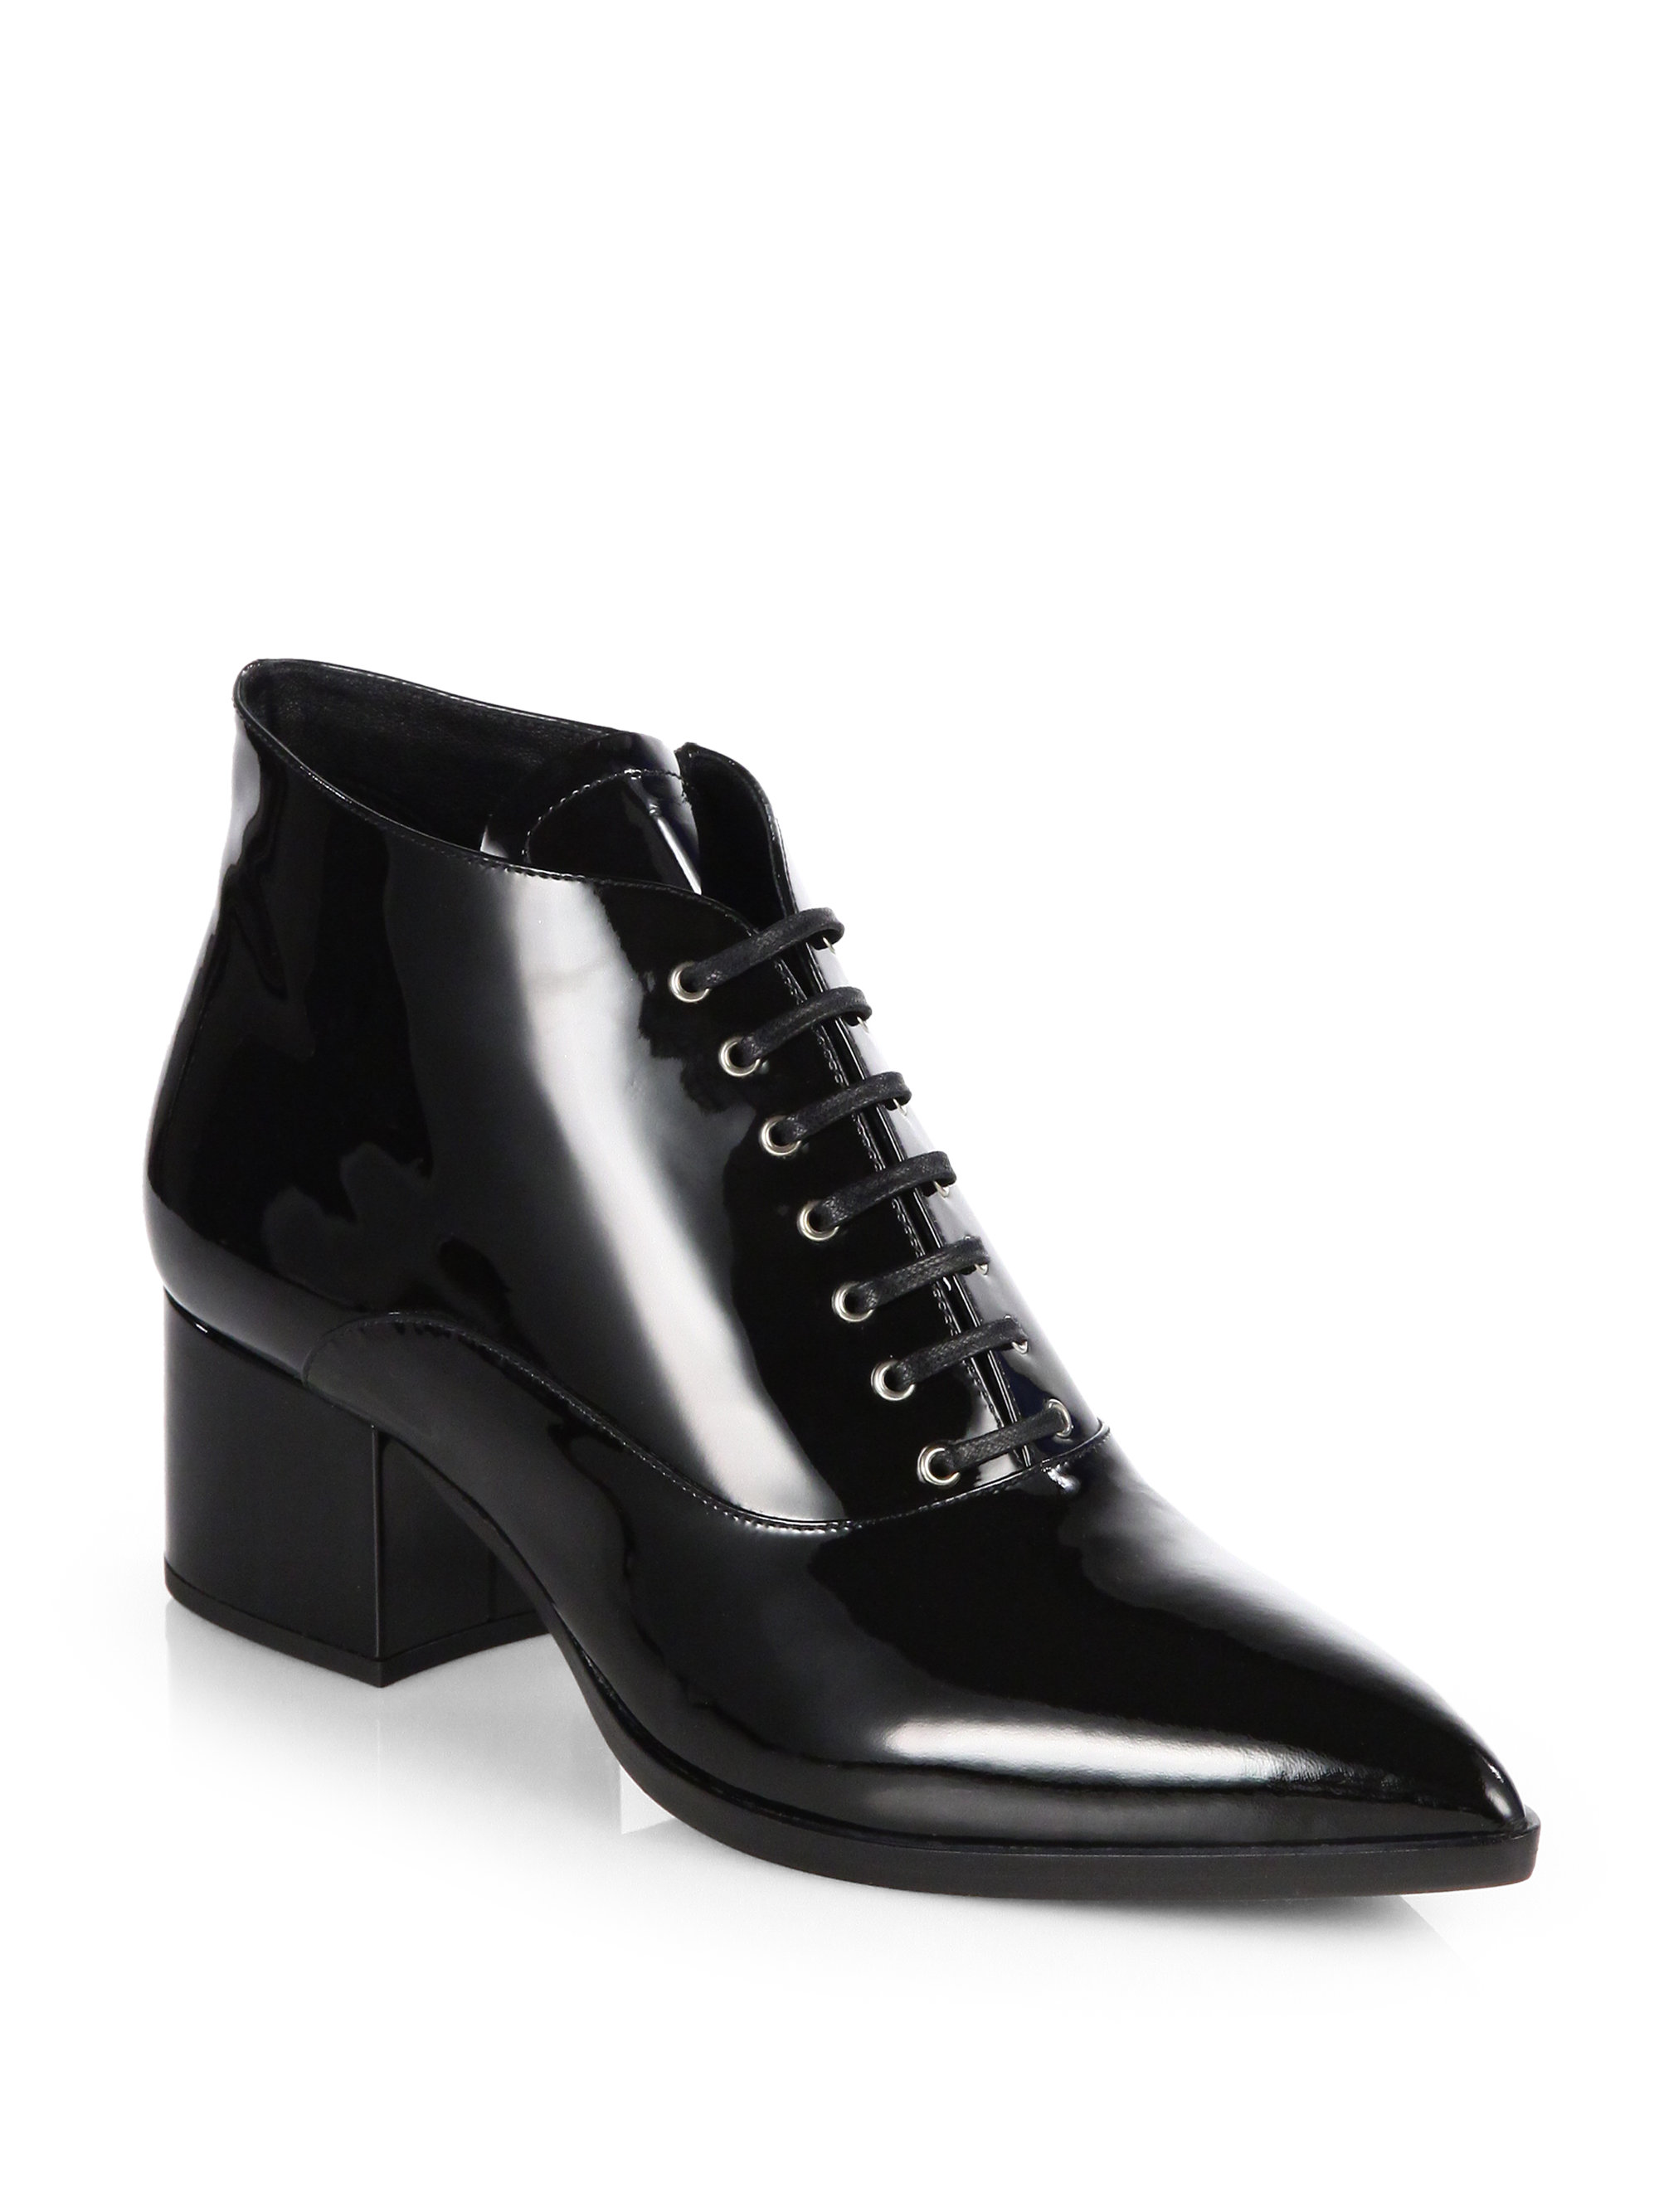 Miu Miu Patent Leather Lace-up Ankle Boots in Black | Lyst